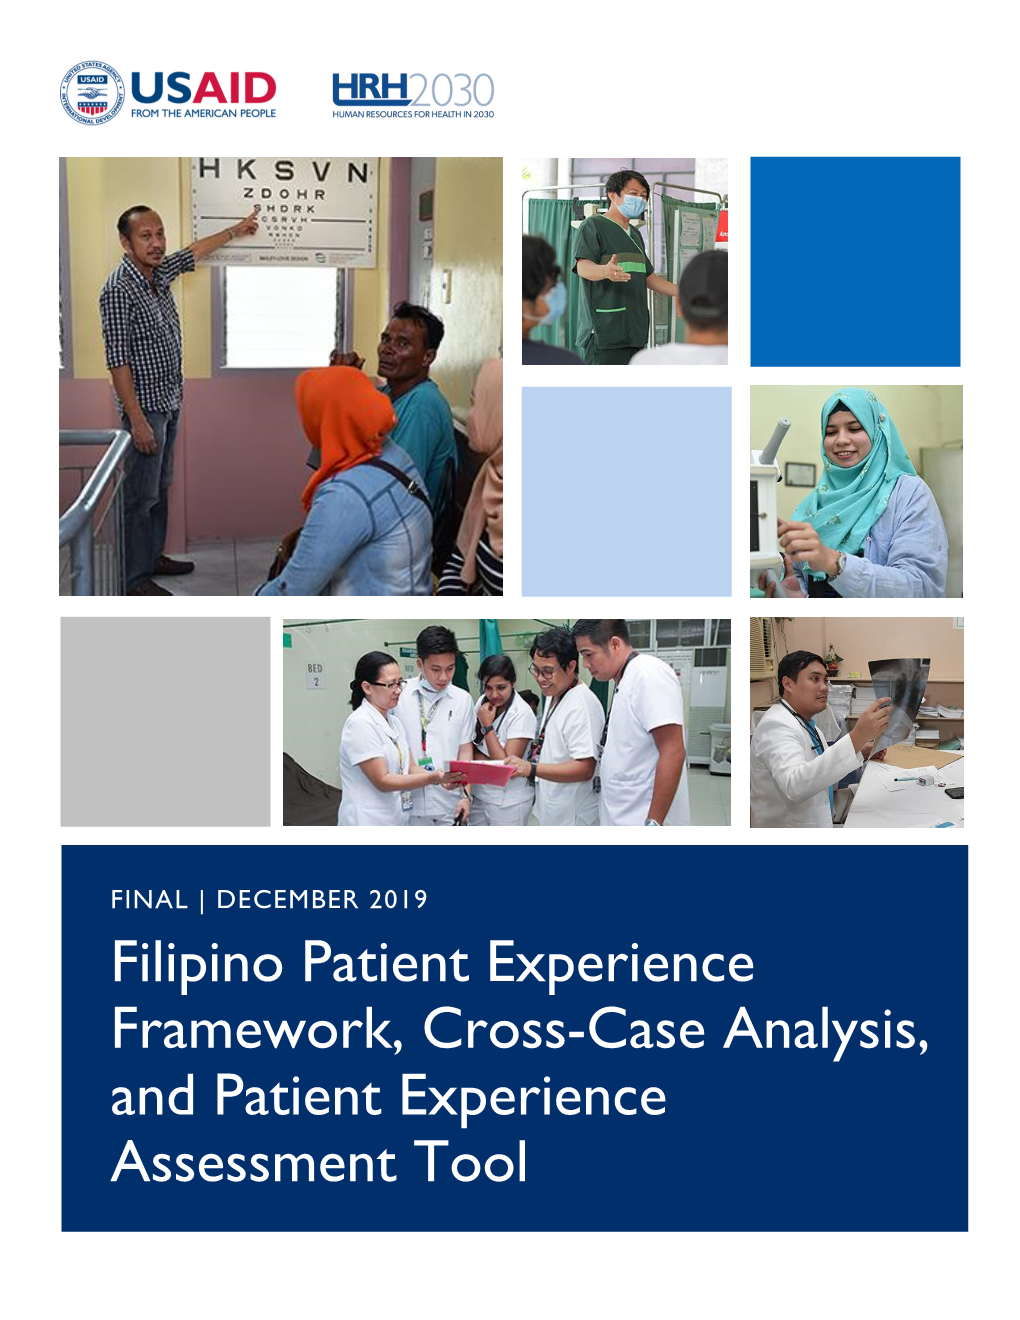 Patient Experience Case Study Analysis, Framework